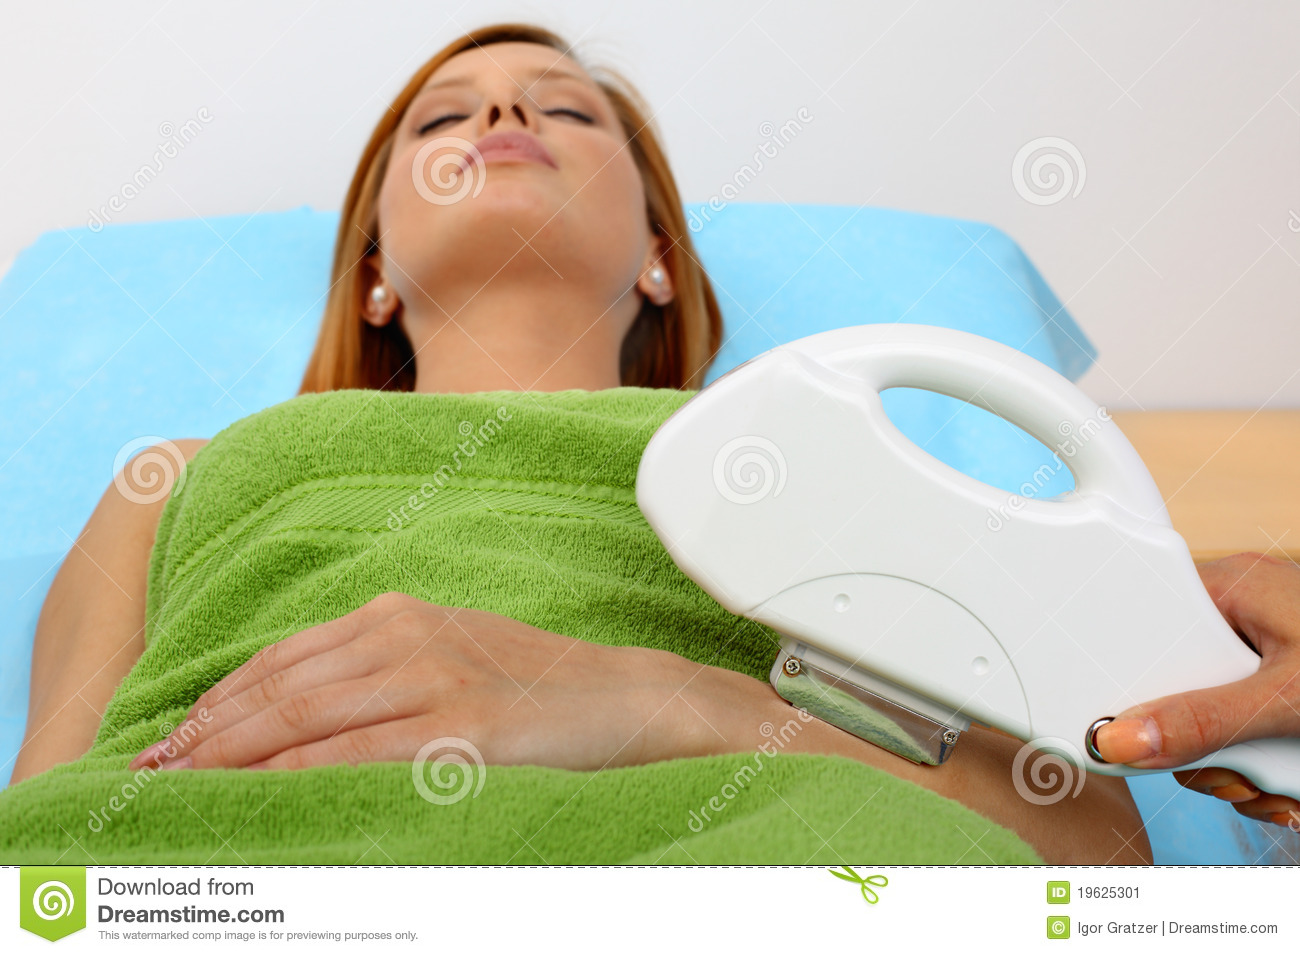 Hair Removal Stock Image   Image  19625301